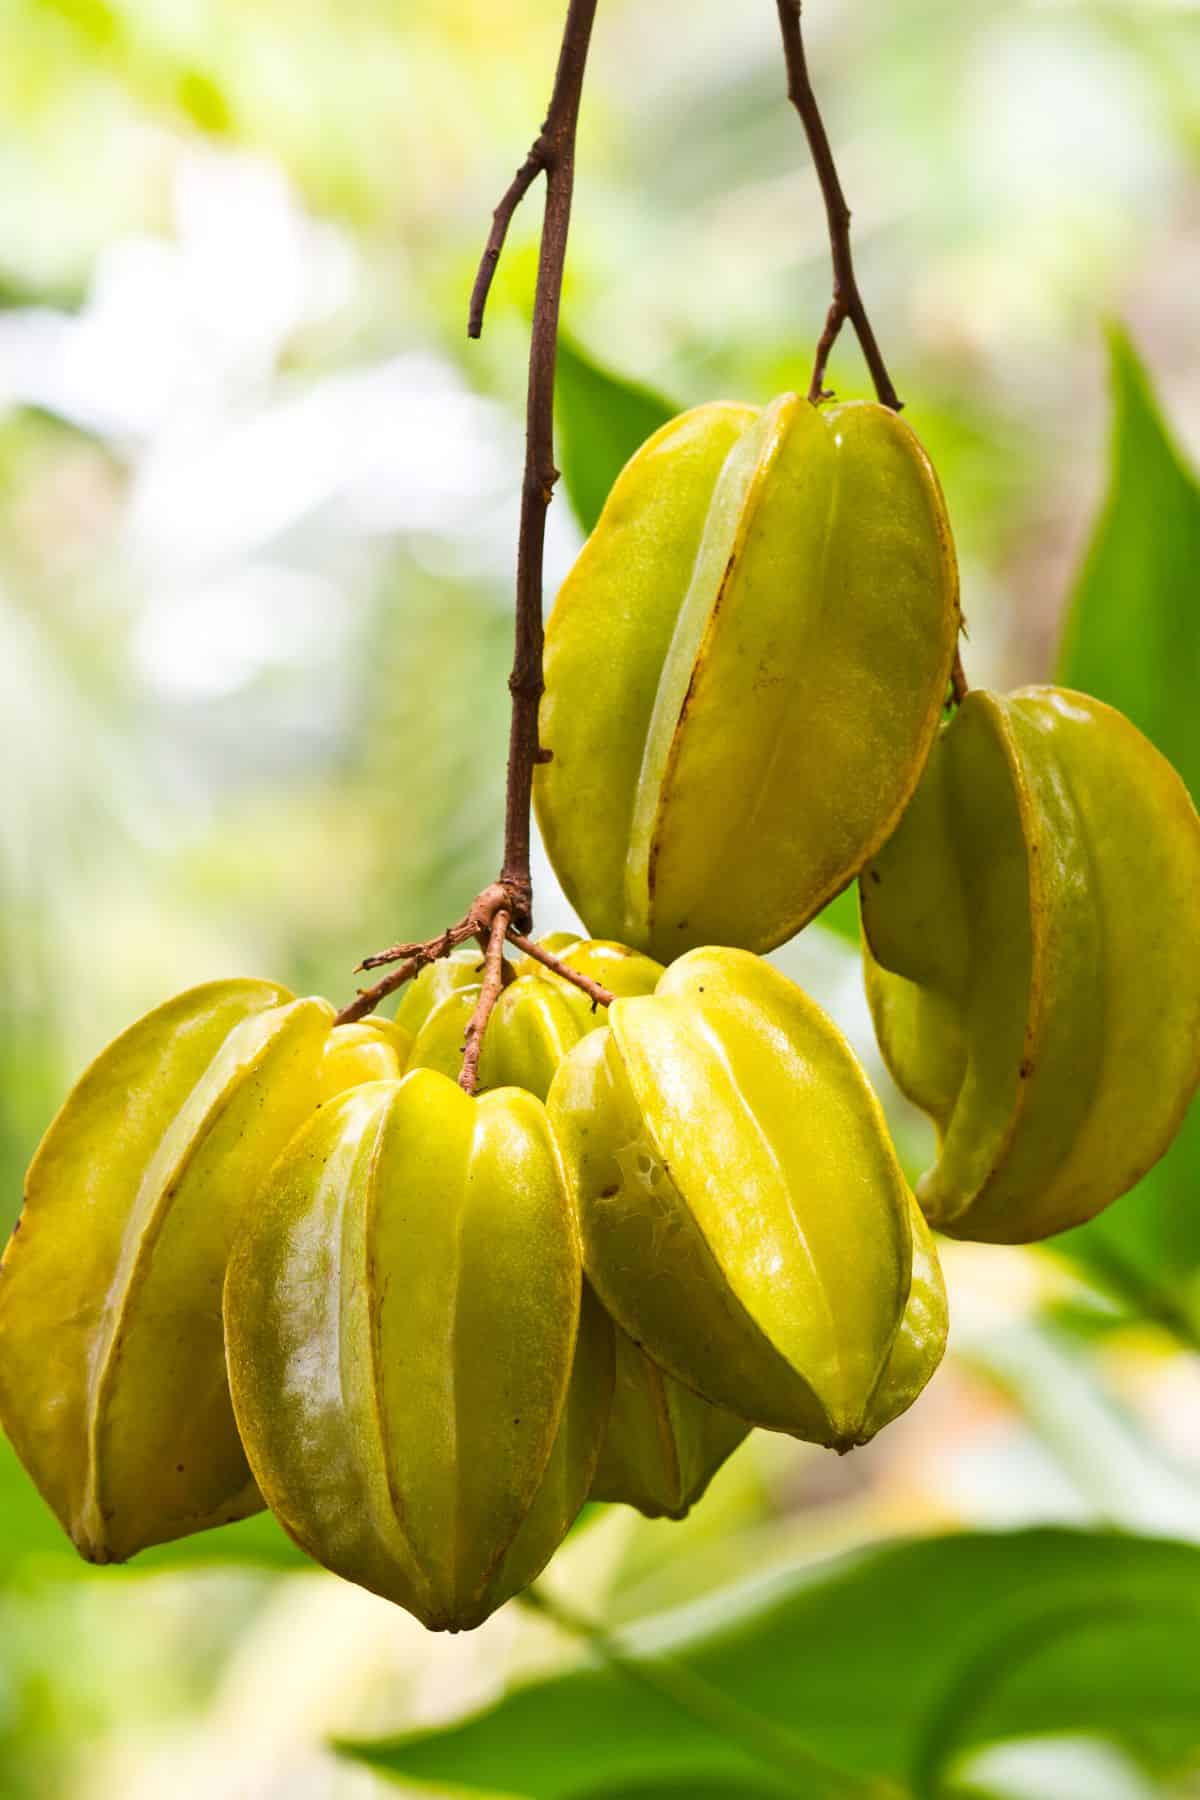 starfruit on tree ready to be picked.